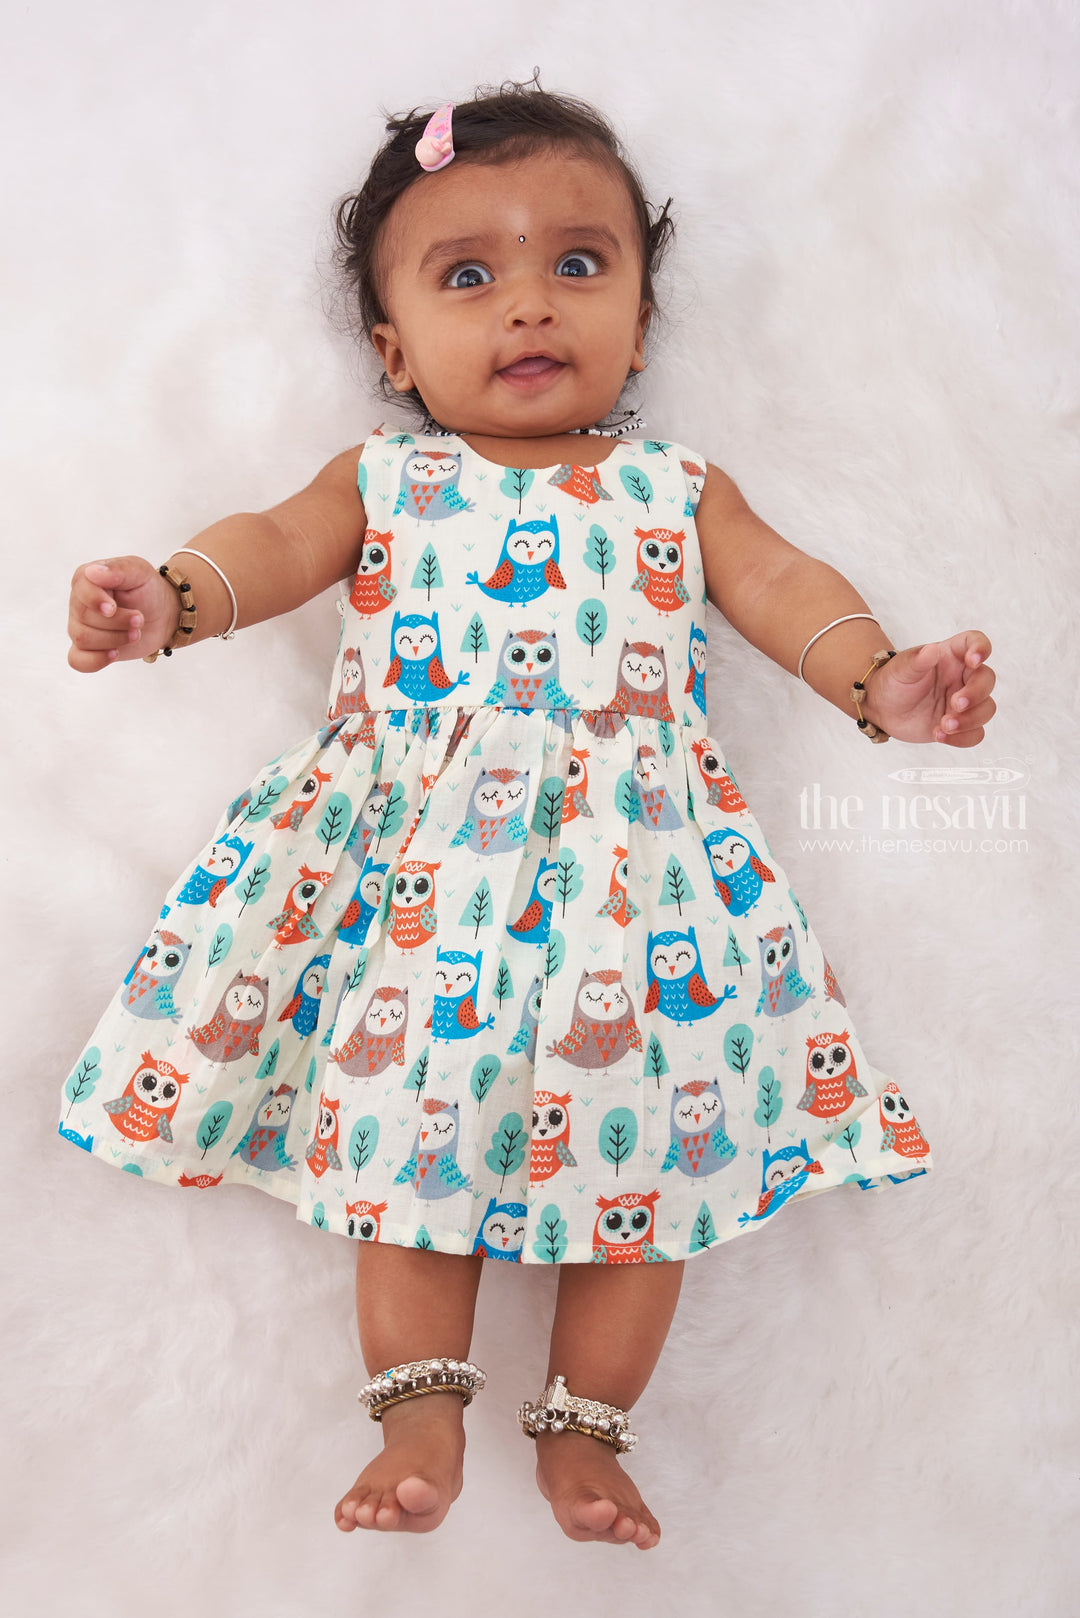 The Nesavu Baby Cotton Frocks Forest Dreams: Charming Owl-Designed Baby Cotton Frock Nesavu 12 (3M) / White / Cotton BFJ488B-12 Cute and Casual Baby Girl Clothes | Everyday Fashion for Infants | The Nesavu